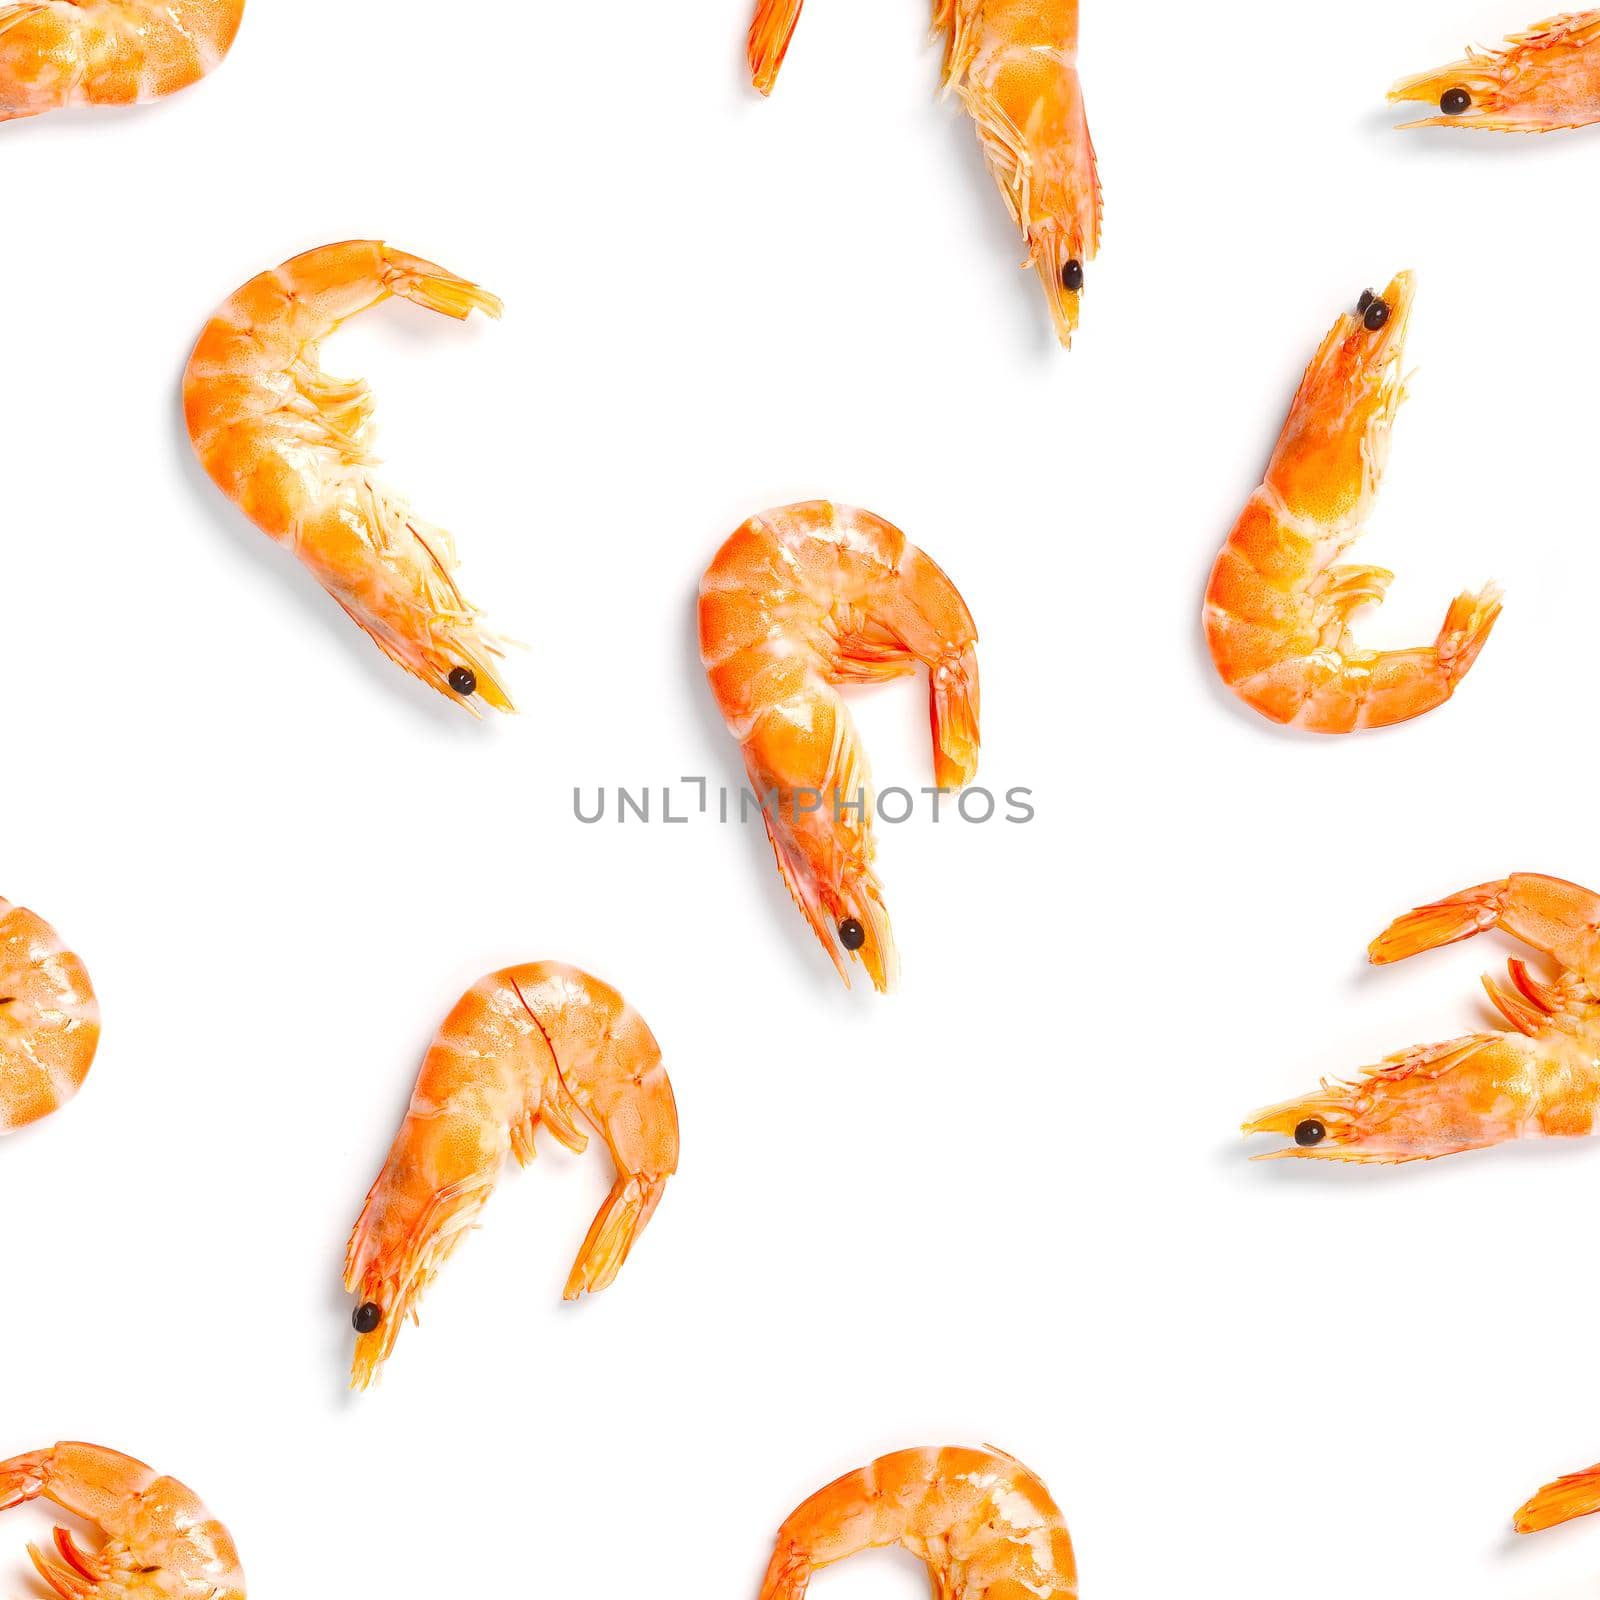 Tiger shrimp. Seamless pattern made from Prawn isolated on a white background. Seafood seamless pattern with shrimps. seafood pattern by PhotoTime